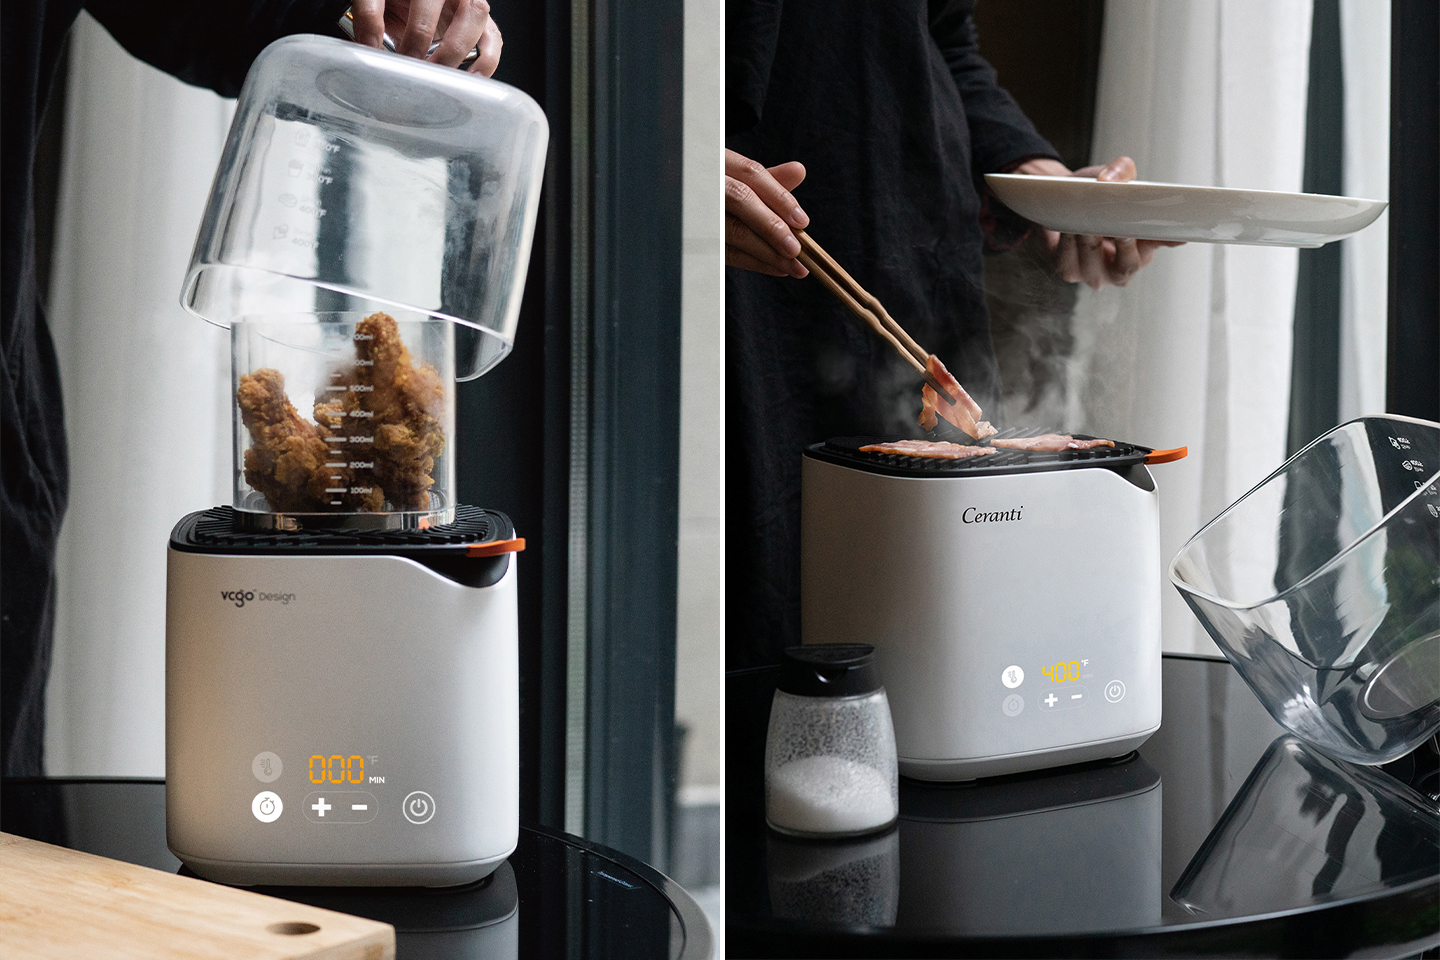 This air fryer and grill is compact, sleek, and lets you watch the  oddly-satisfying process! - Yanko Design